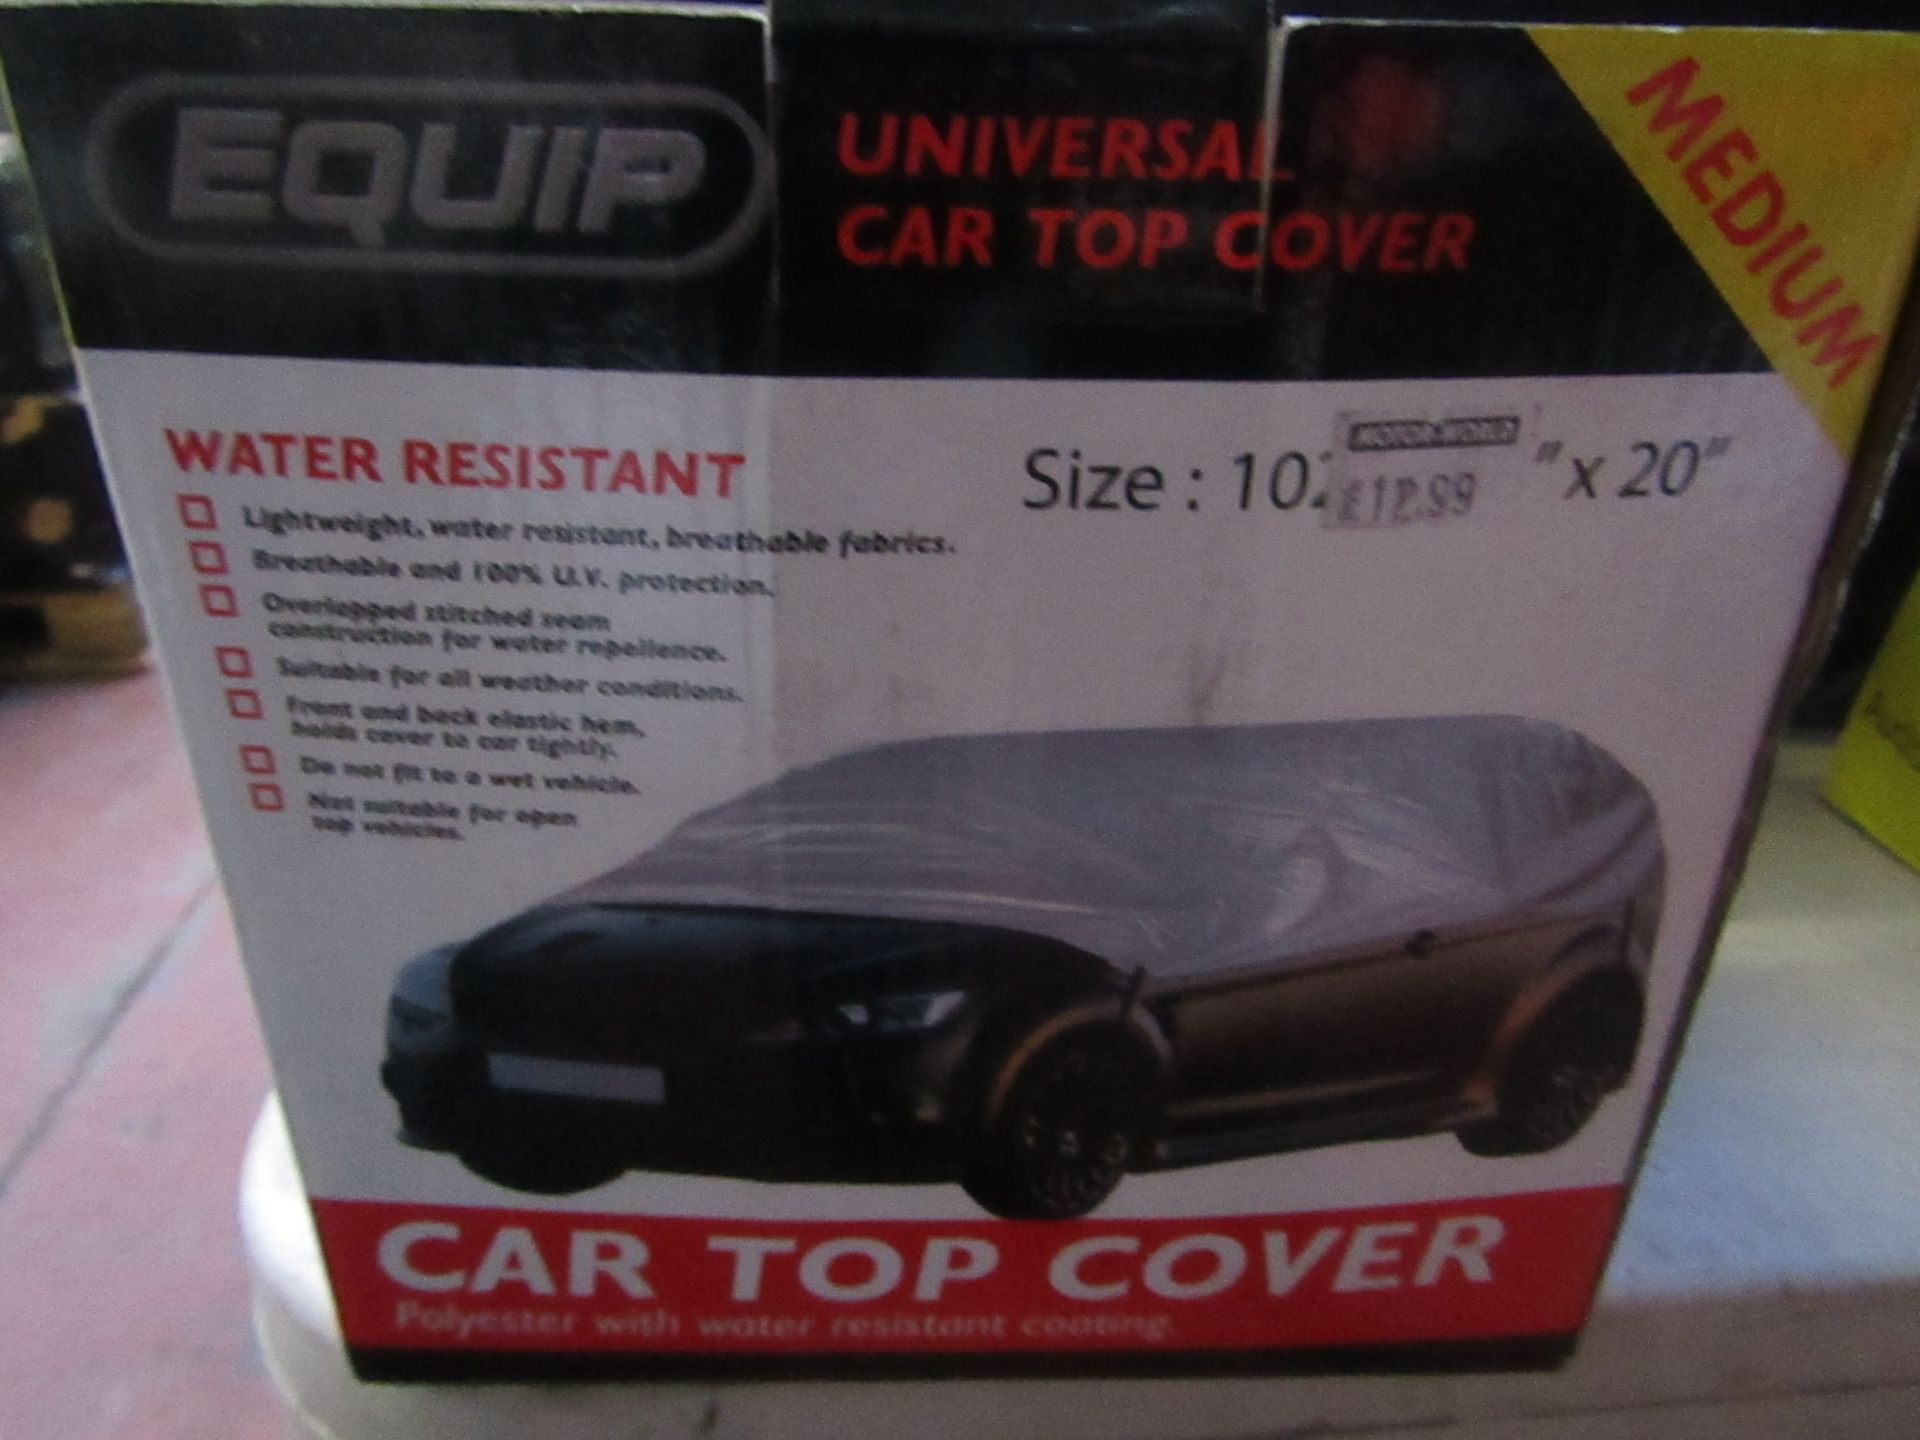 Equip - Universal Car Top Cover 102x58x20" - Unchecked & Boxed.